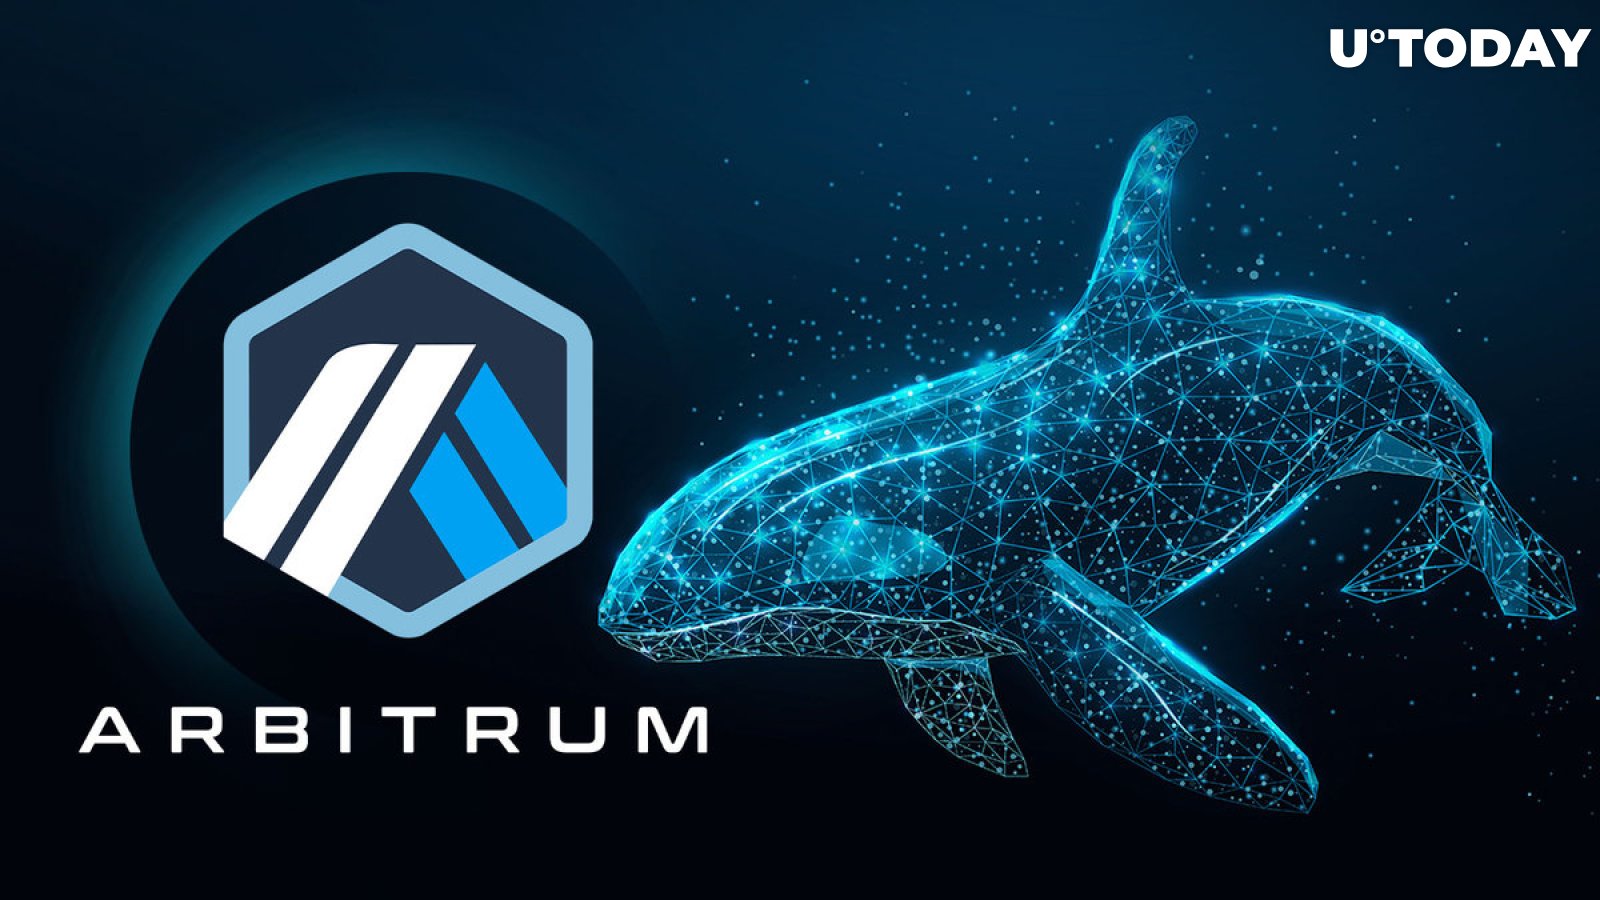 Arbitrum (ARB) Whales Selling? Here's What Data Shows